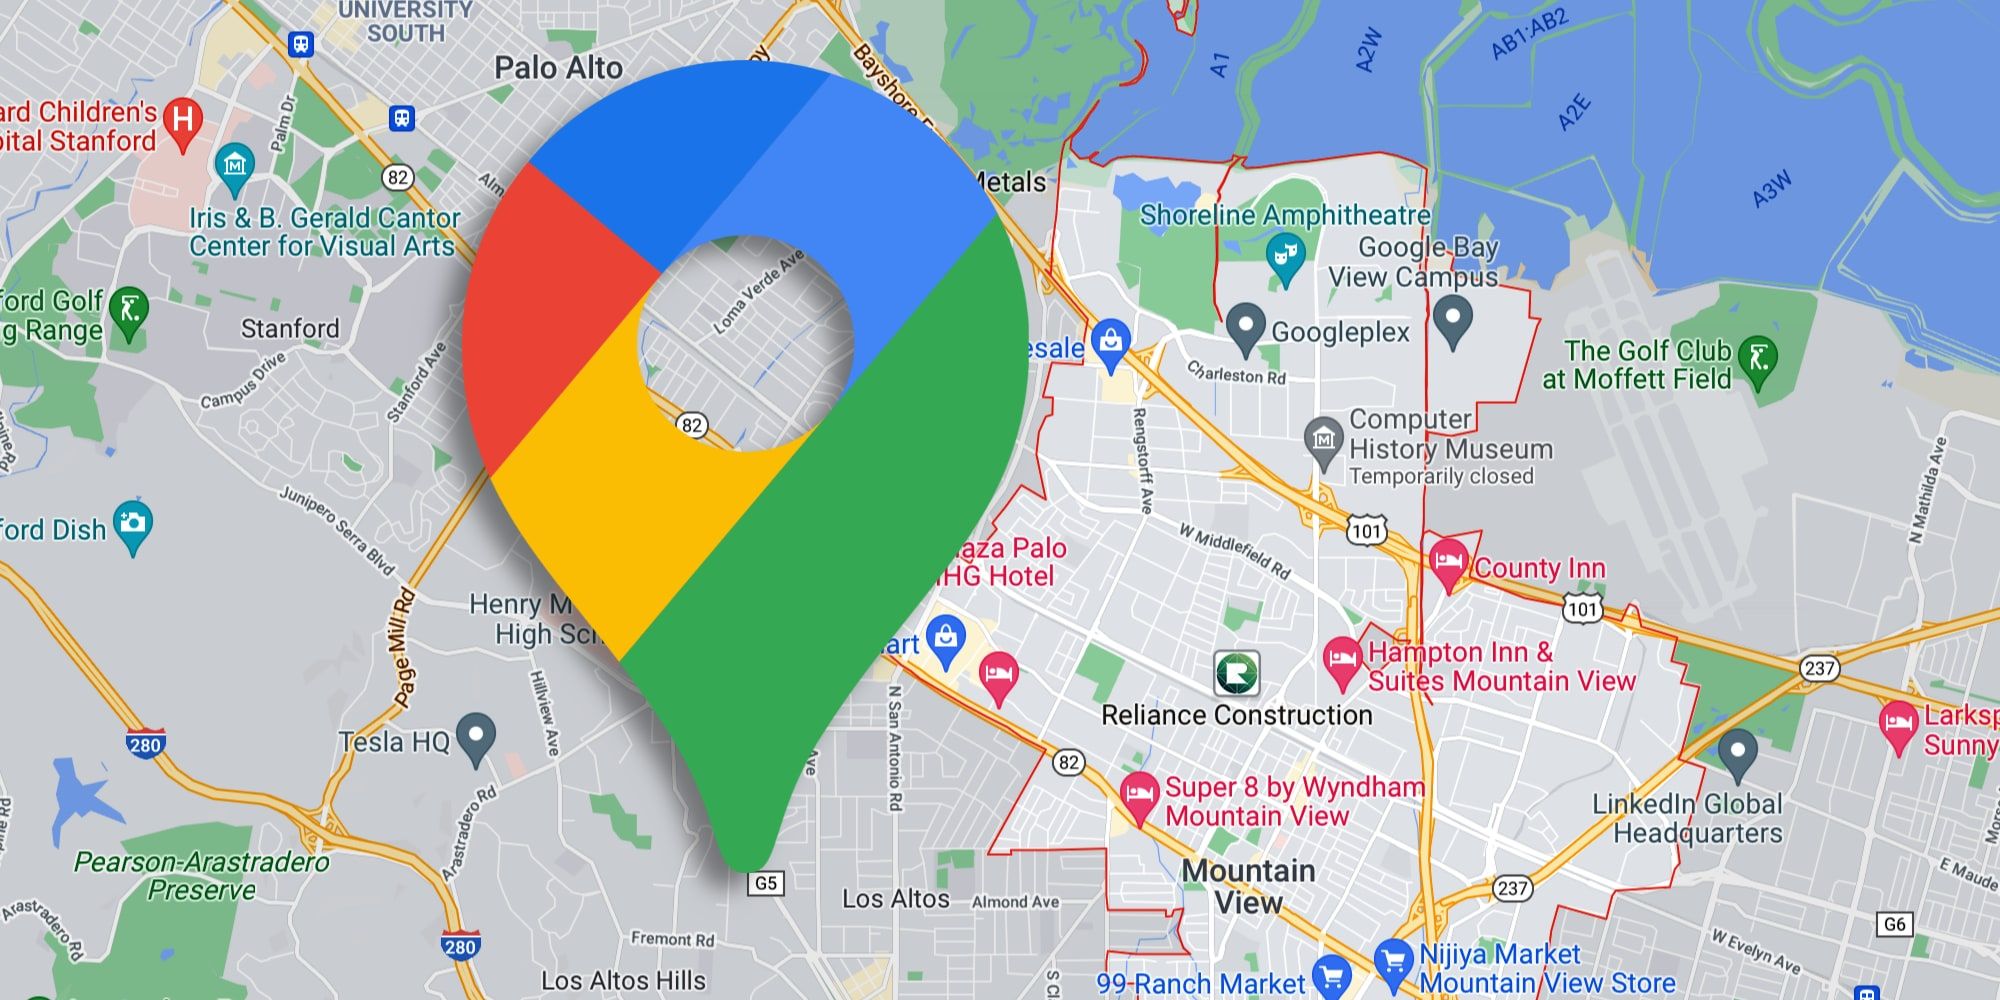 Google Maps Logo Over Map Of Mountain View CA